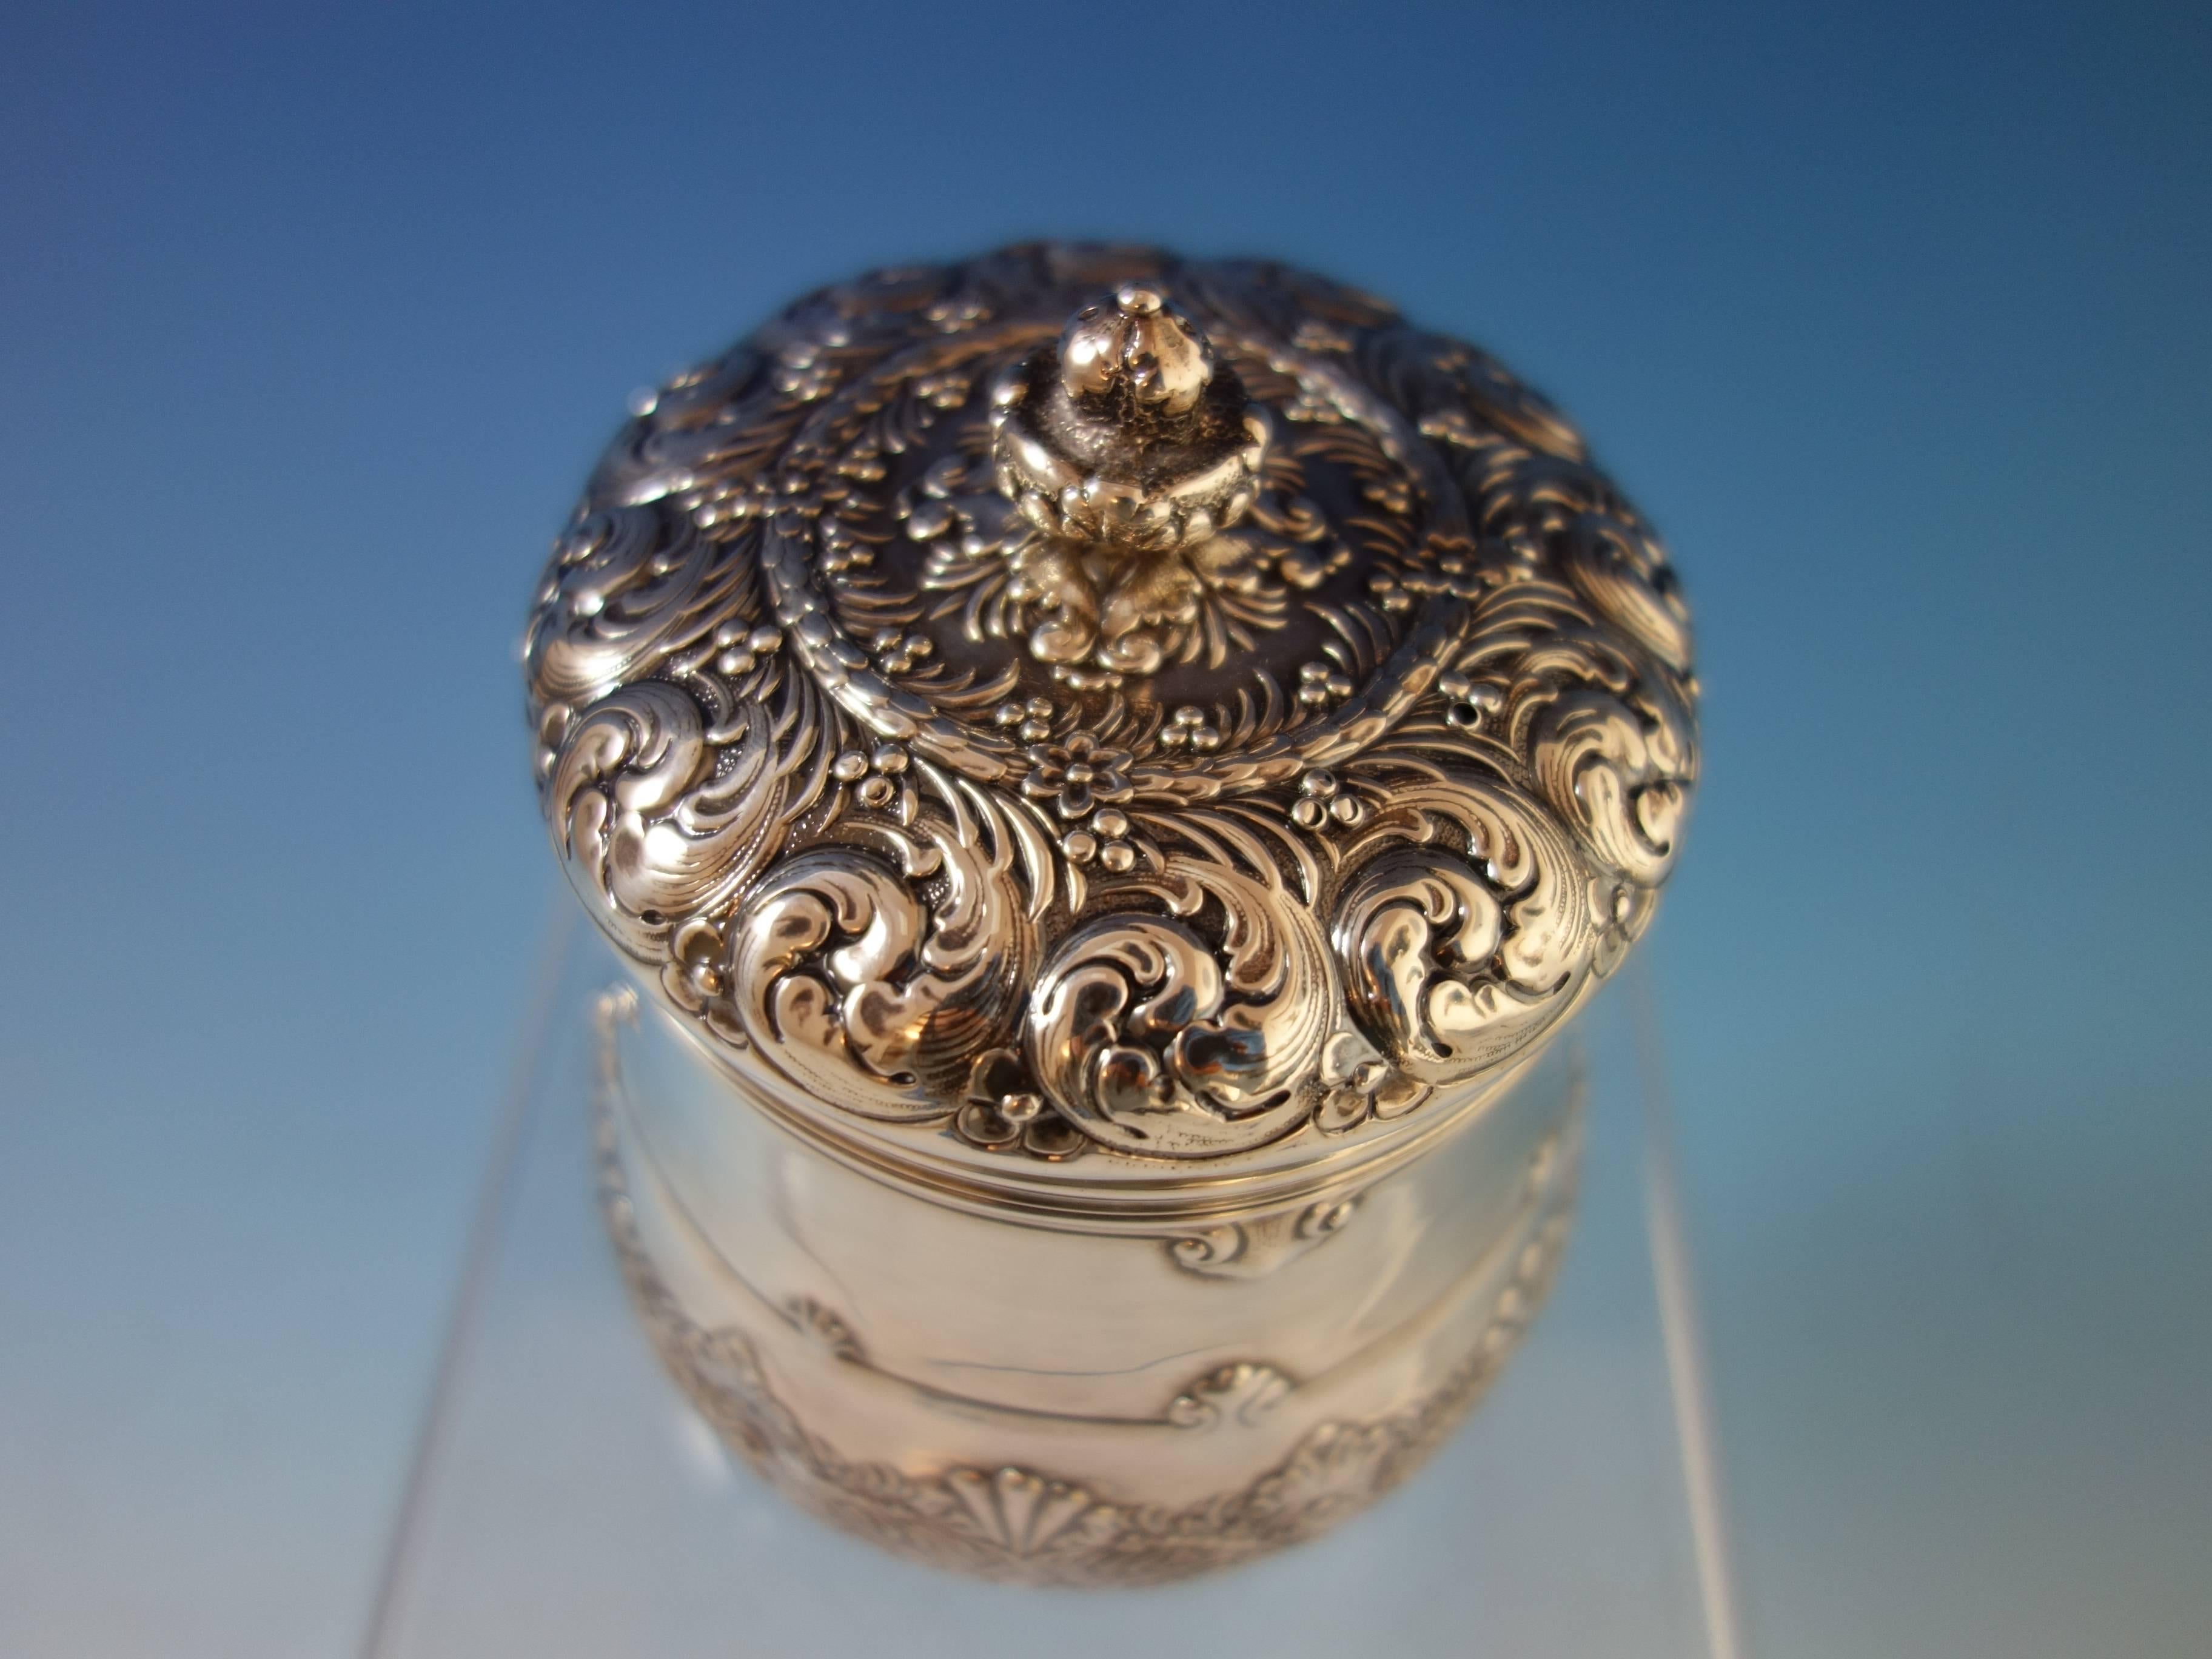 Tiffany and Co. sterling silver tea caddy with repoussed scrollwork and gold washed interior. This piece is marked #10444-9066 with a "T" date mark for 1892-1902. It weighs 7.45 troy ounces and measures 4 1/2" x 3 1/4". This